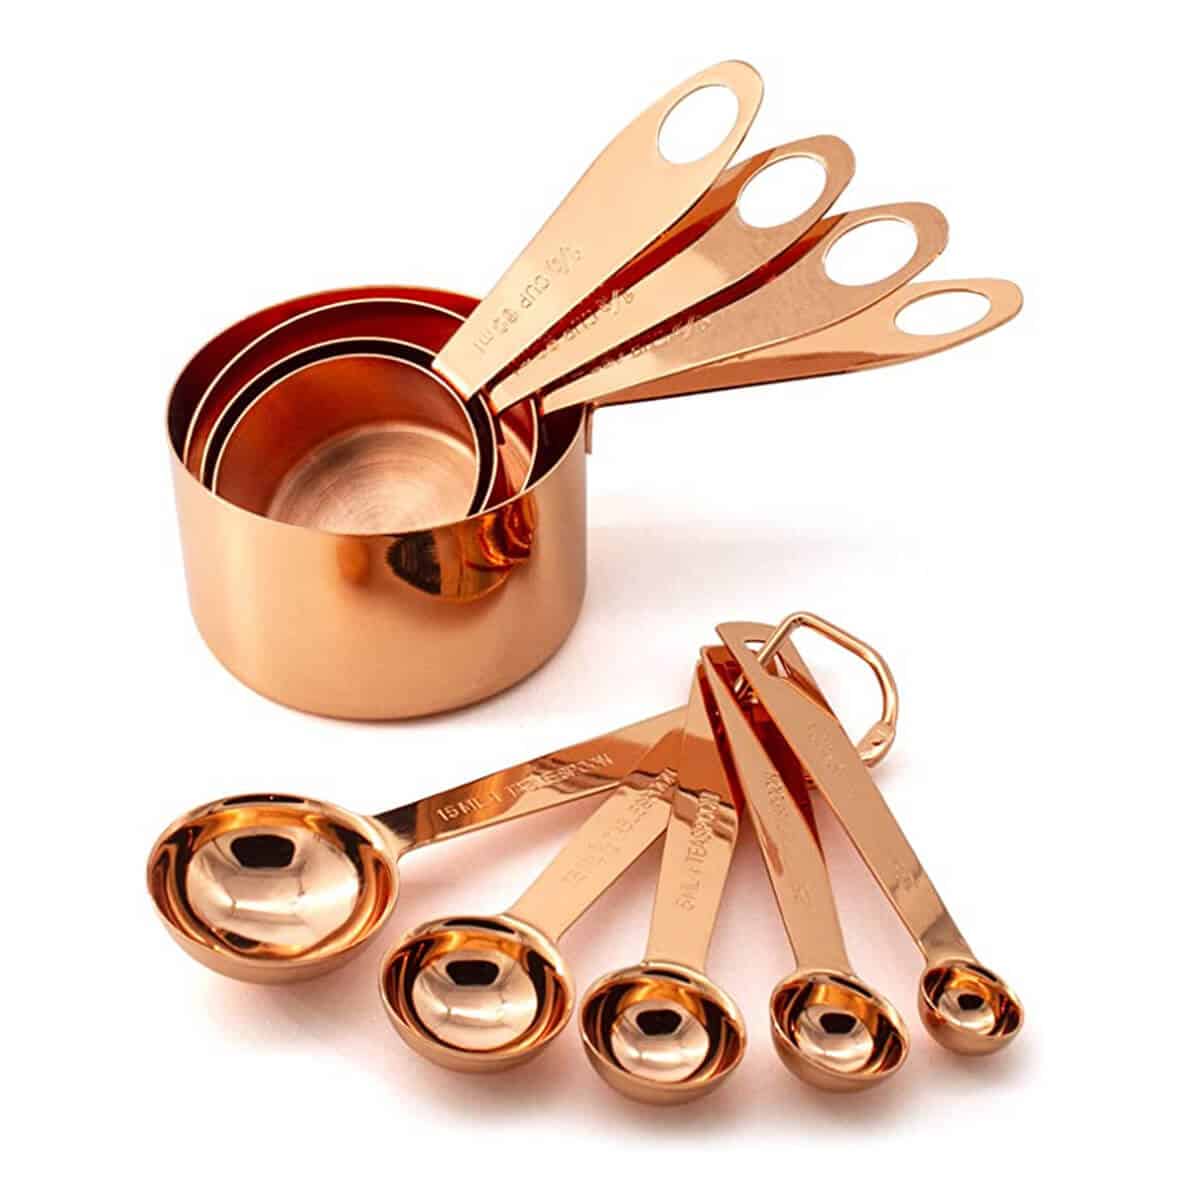 copper measuring cups and spoons.